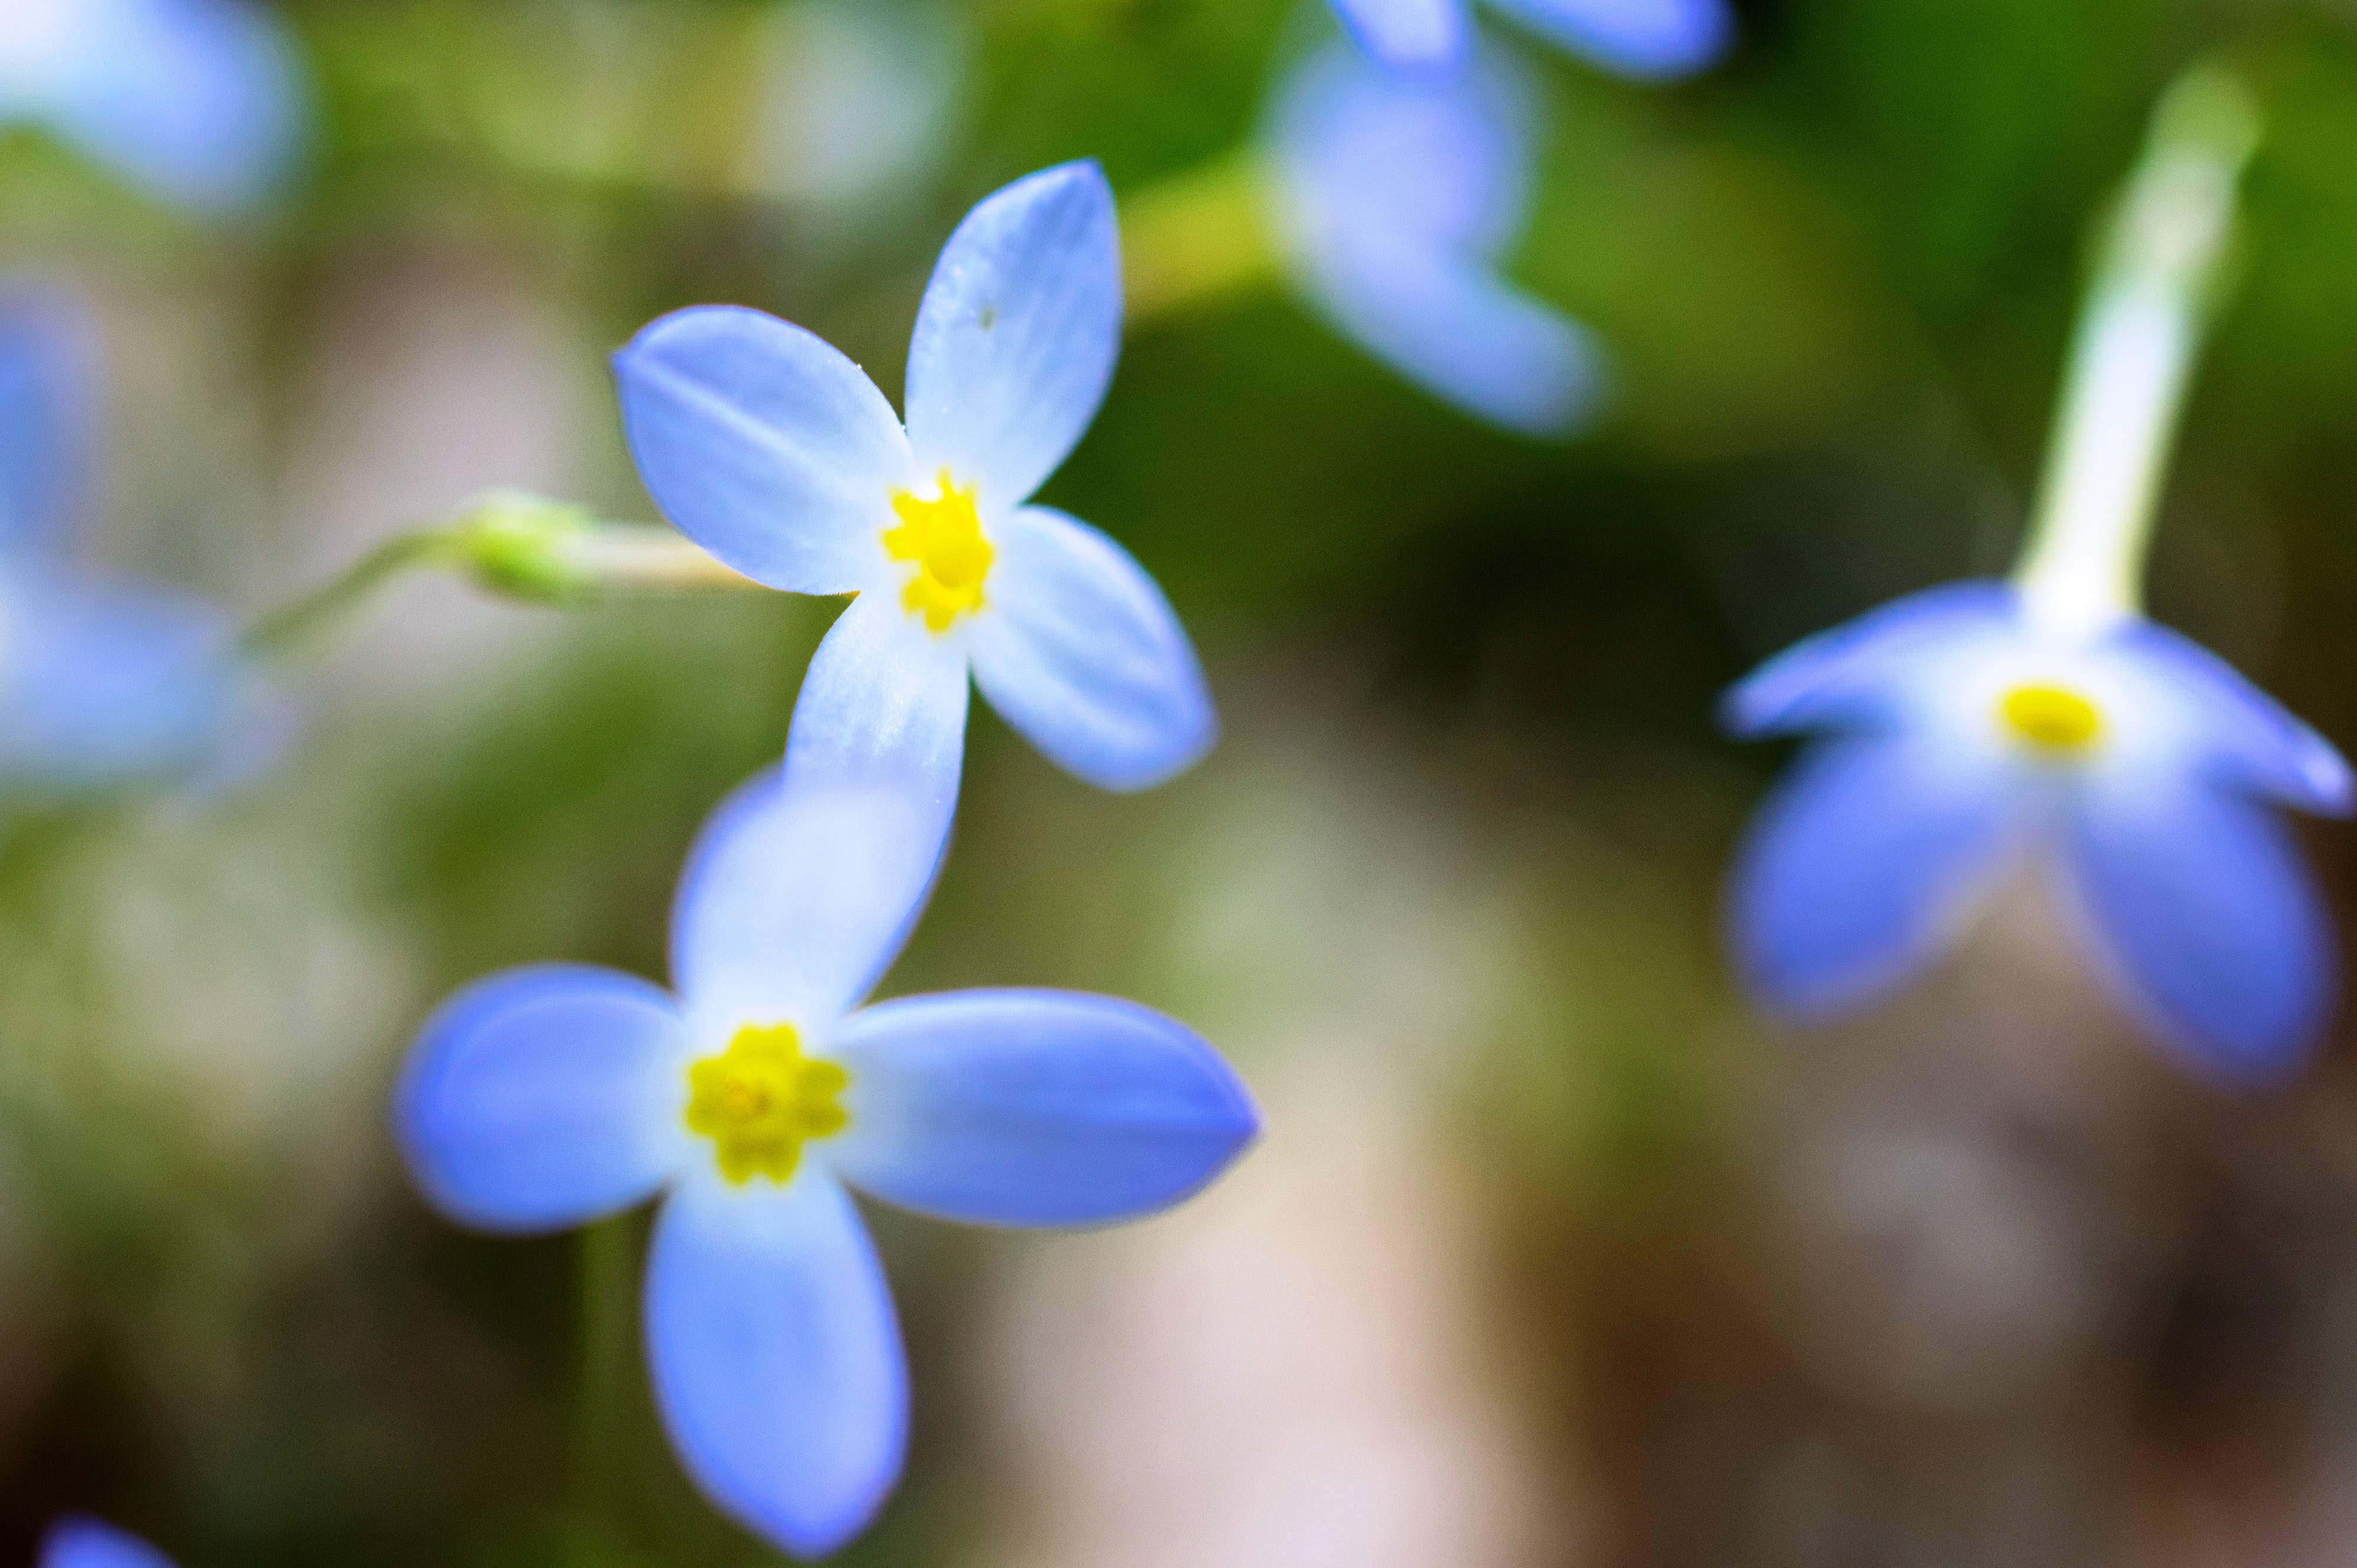 Delicate blue and yellow flowers bloom together.